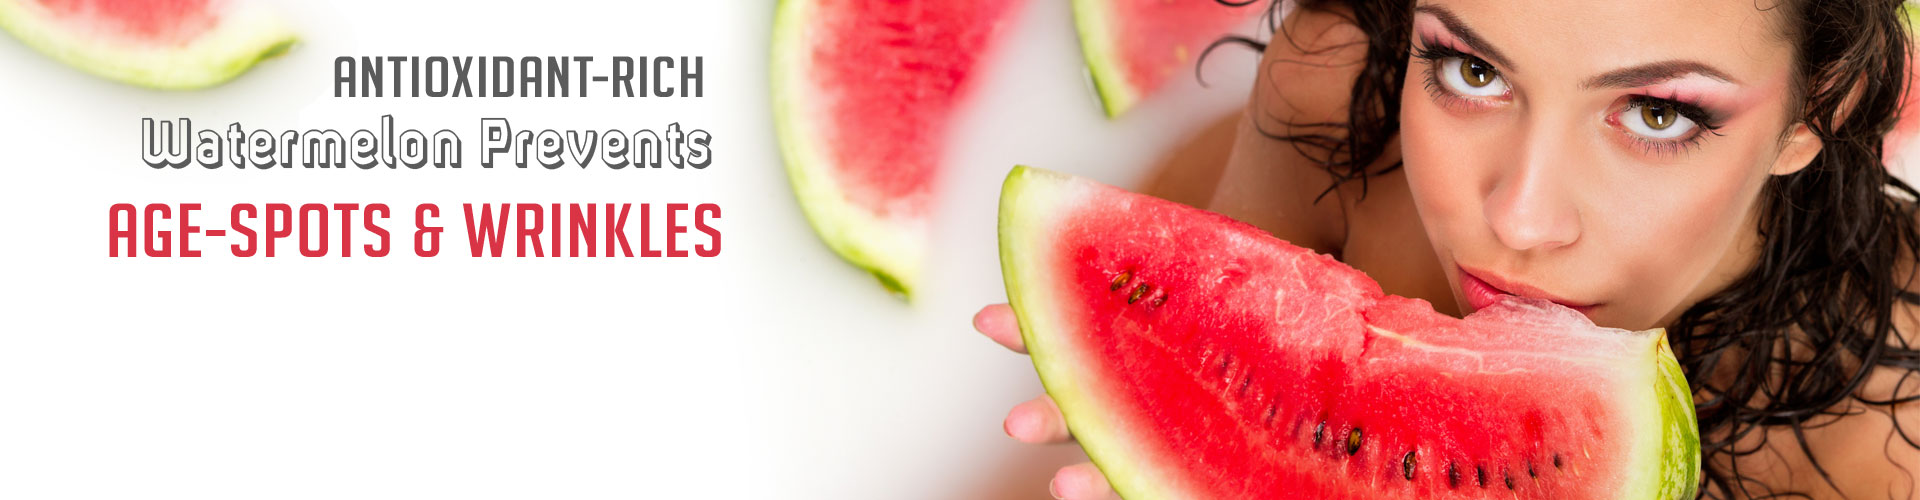 Antioxidant-Rich Watermelon Prevents Age-Spots and Wrinkles